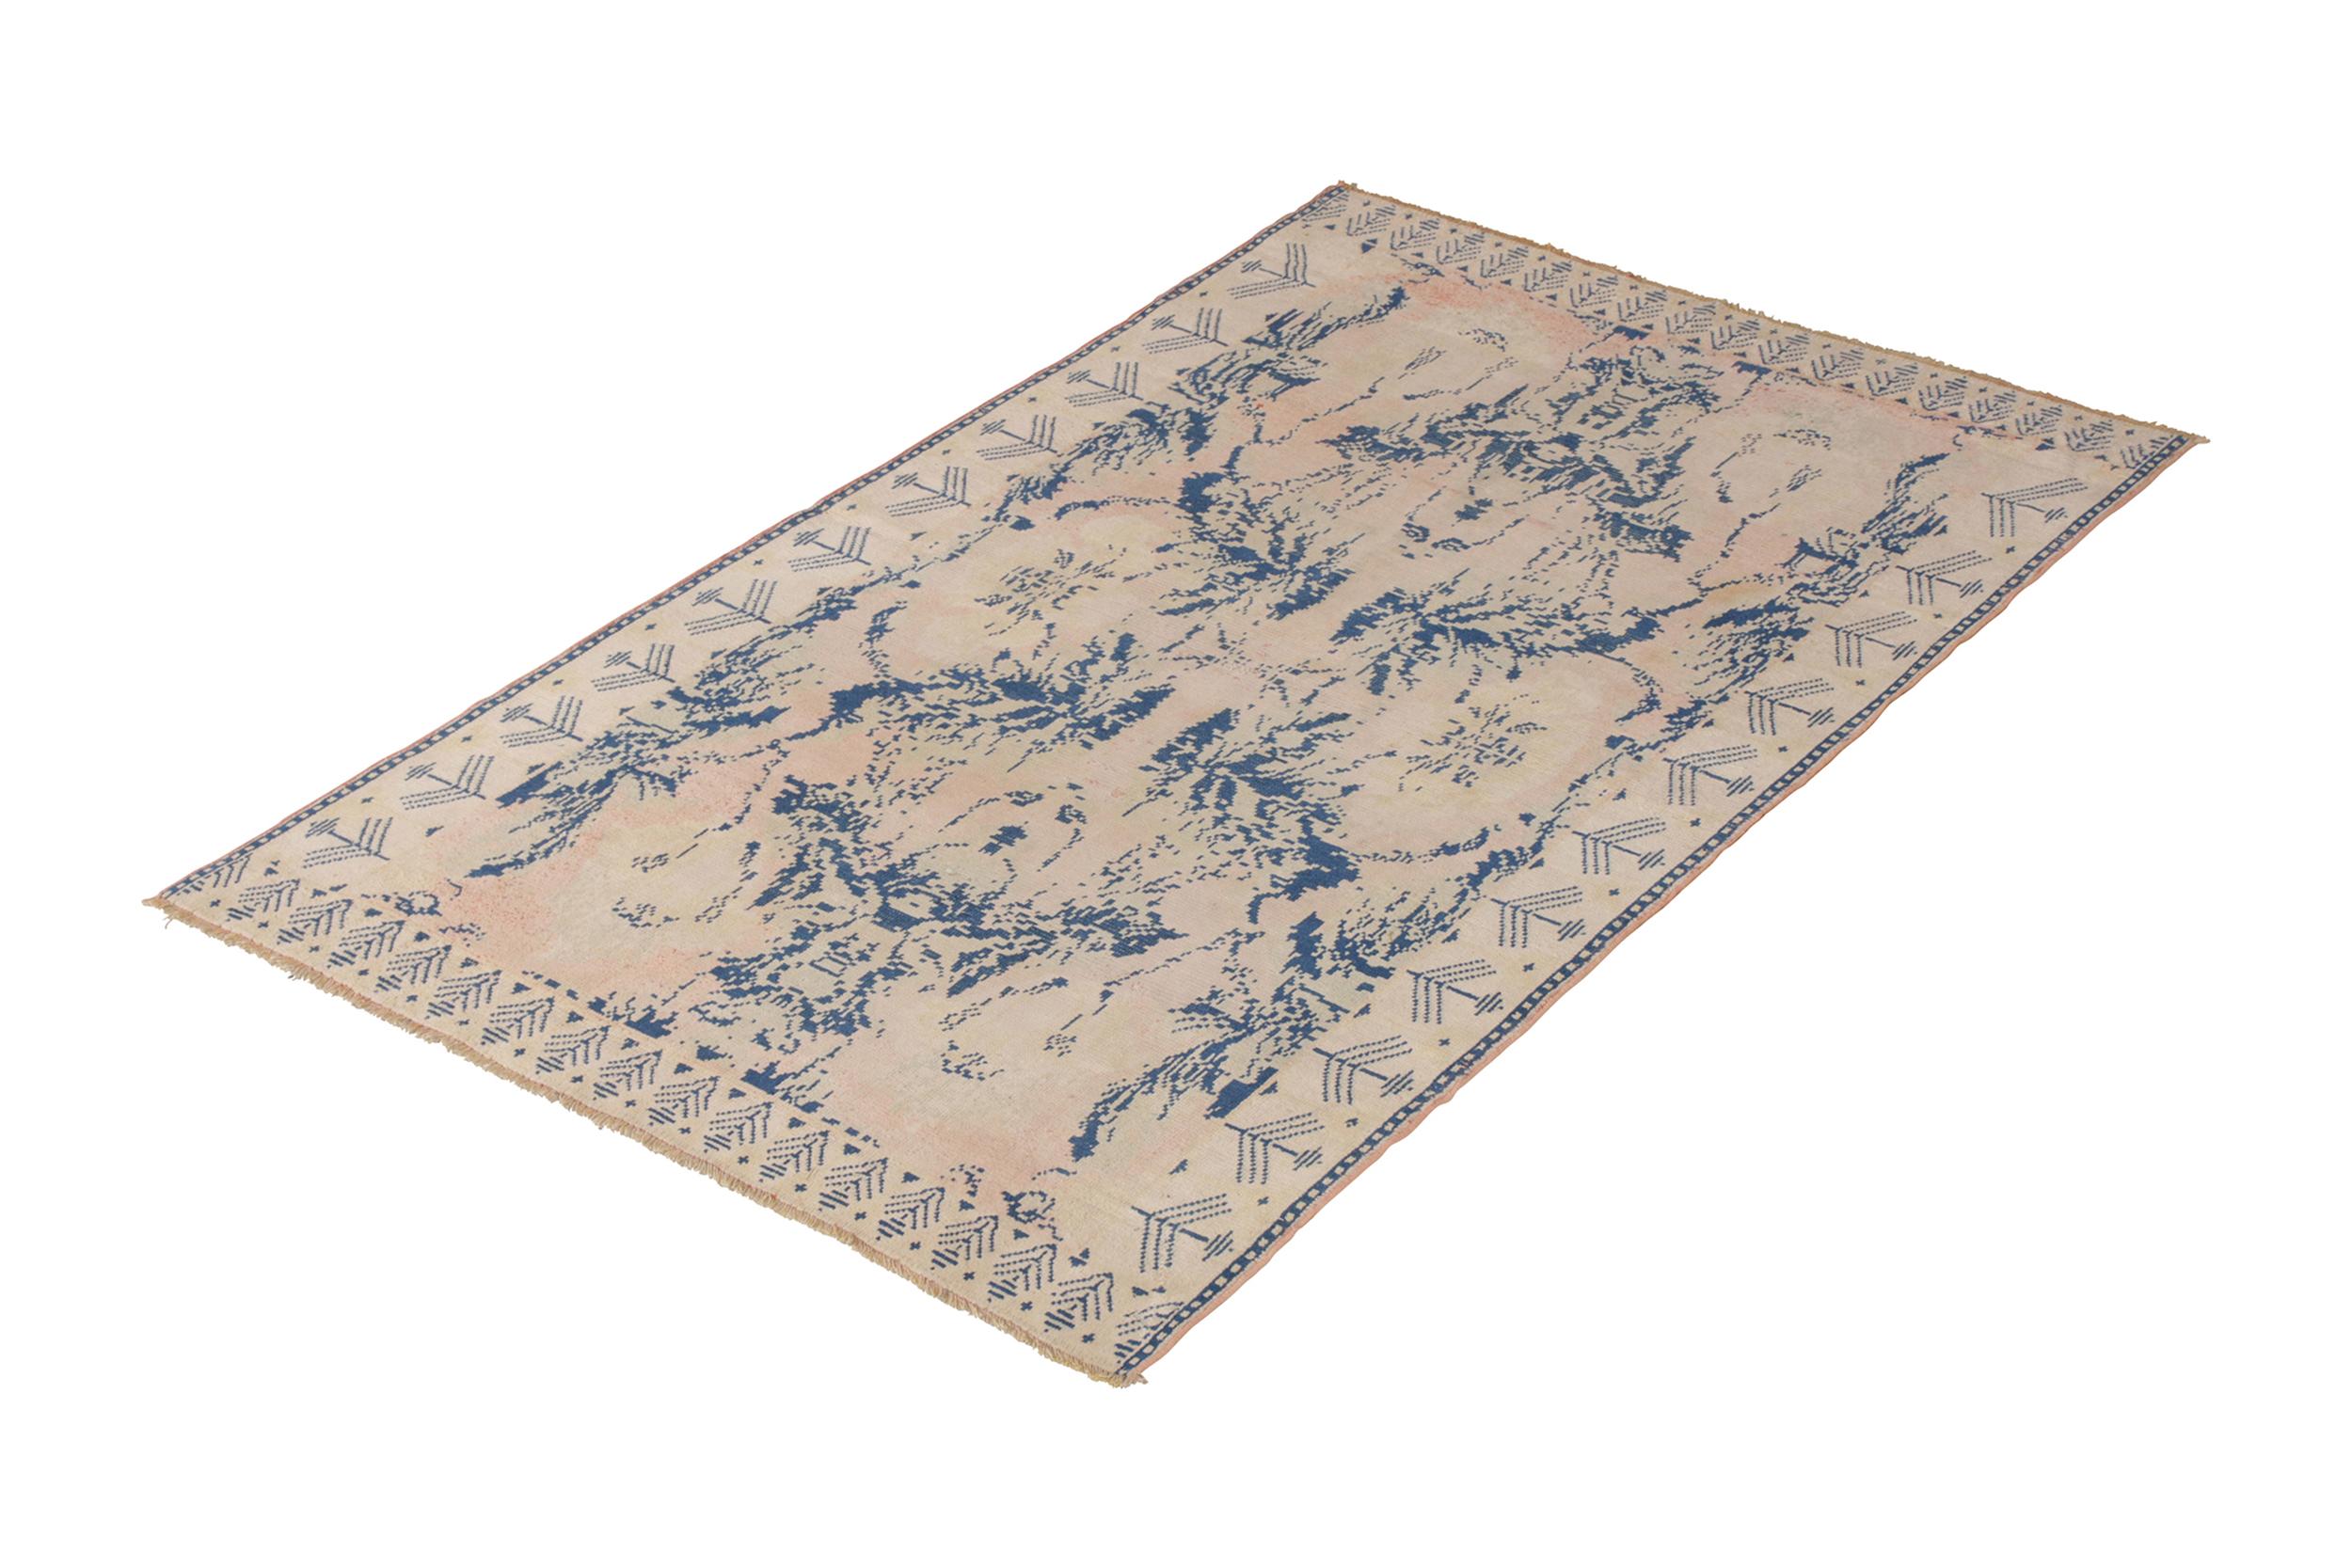 Hand-knotted in cotton originating from India circa 1910-1920, this 4 x 7 antique rug connotes an Agra design in a distinguished floral pattern, enjoying blue and cream colors in good condition.